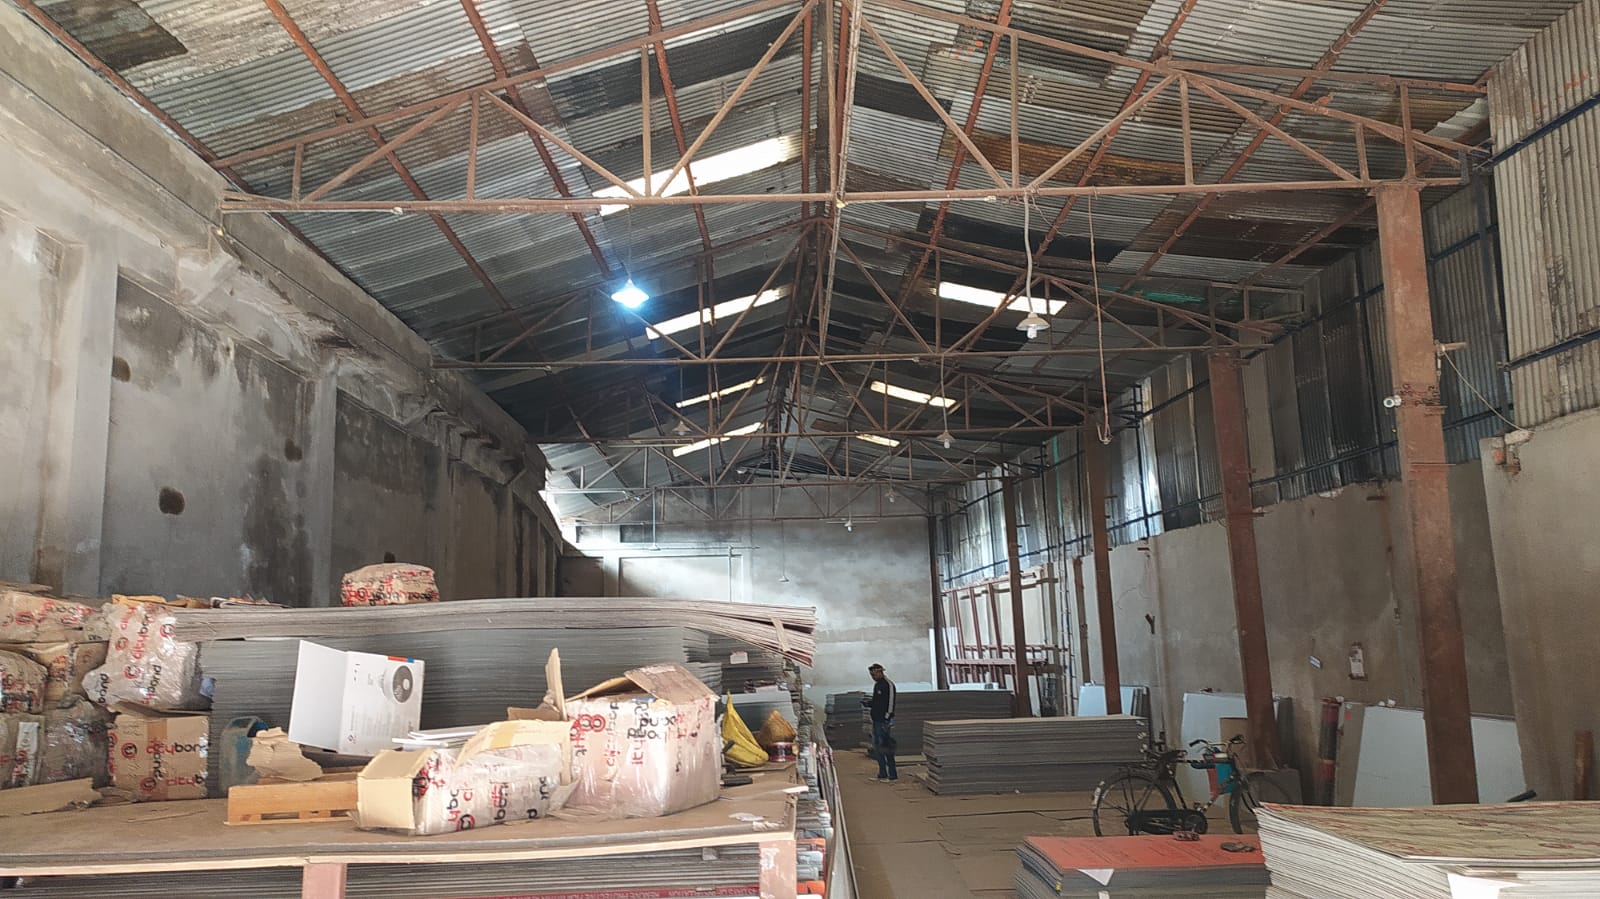 3500 Sq Feet Commercial Warehouses/Godowns for Rent Only in BARASAT 24-PARGANAS(N)